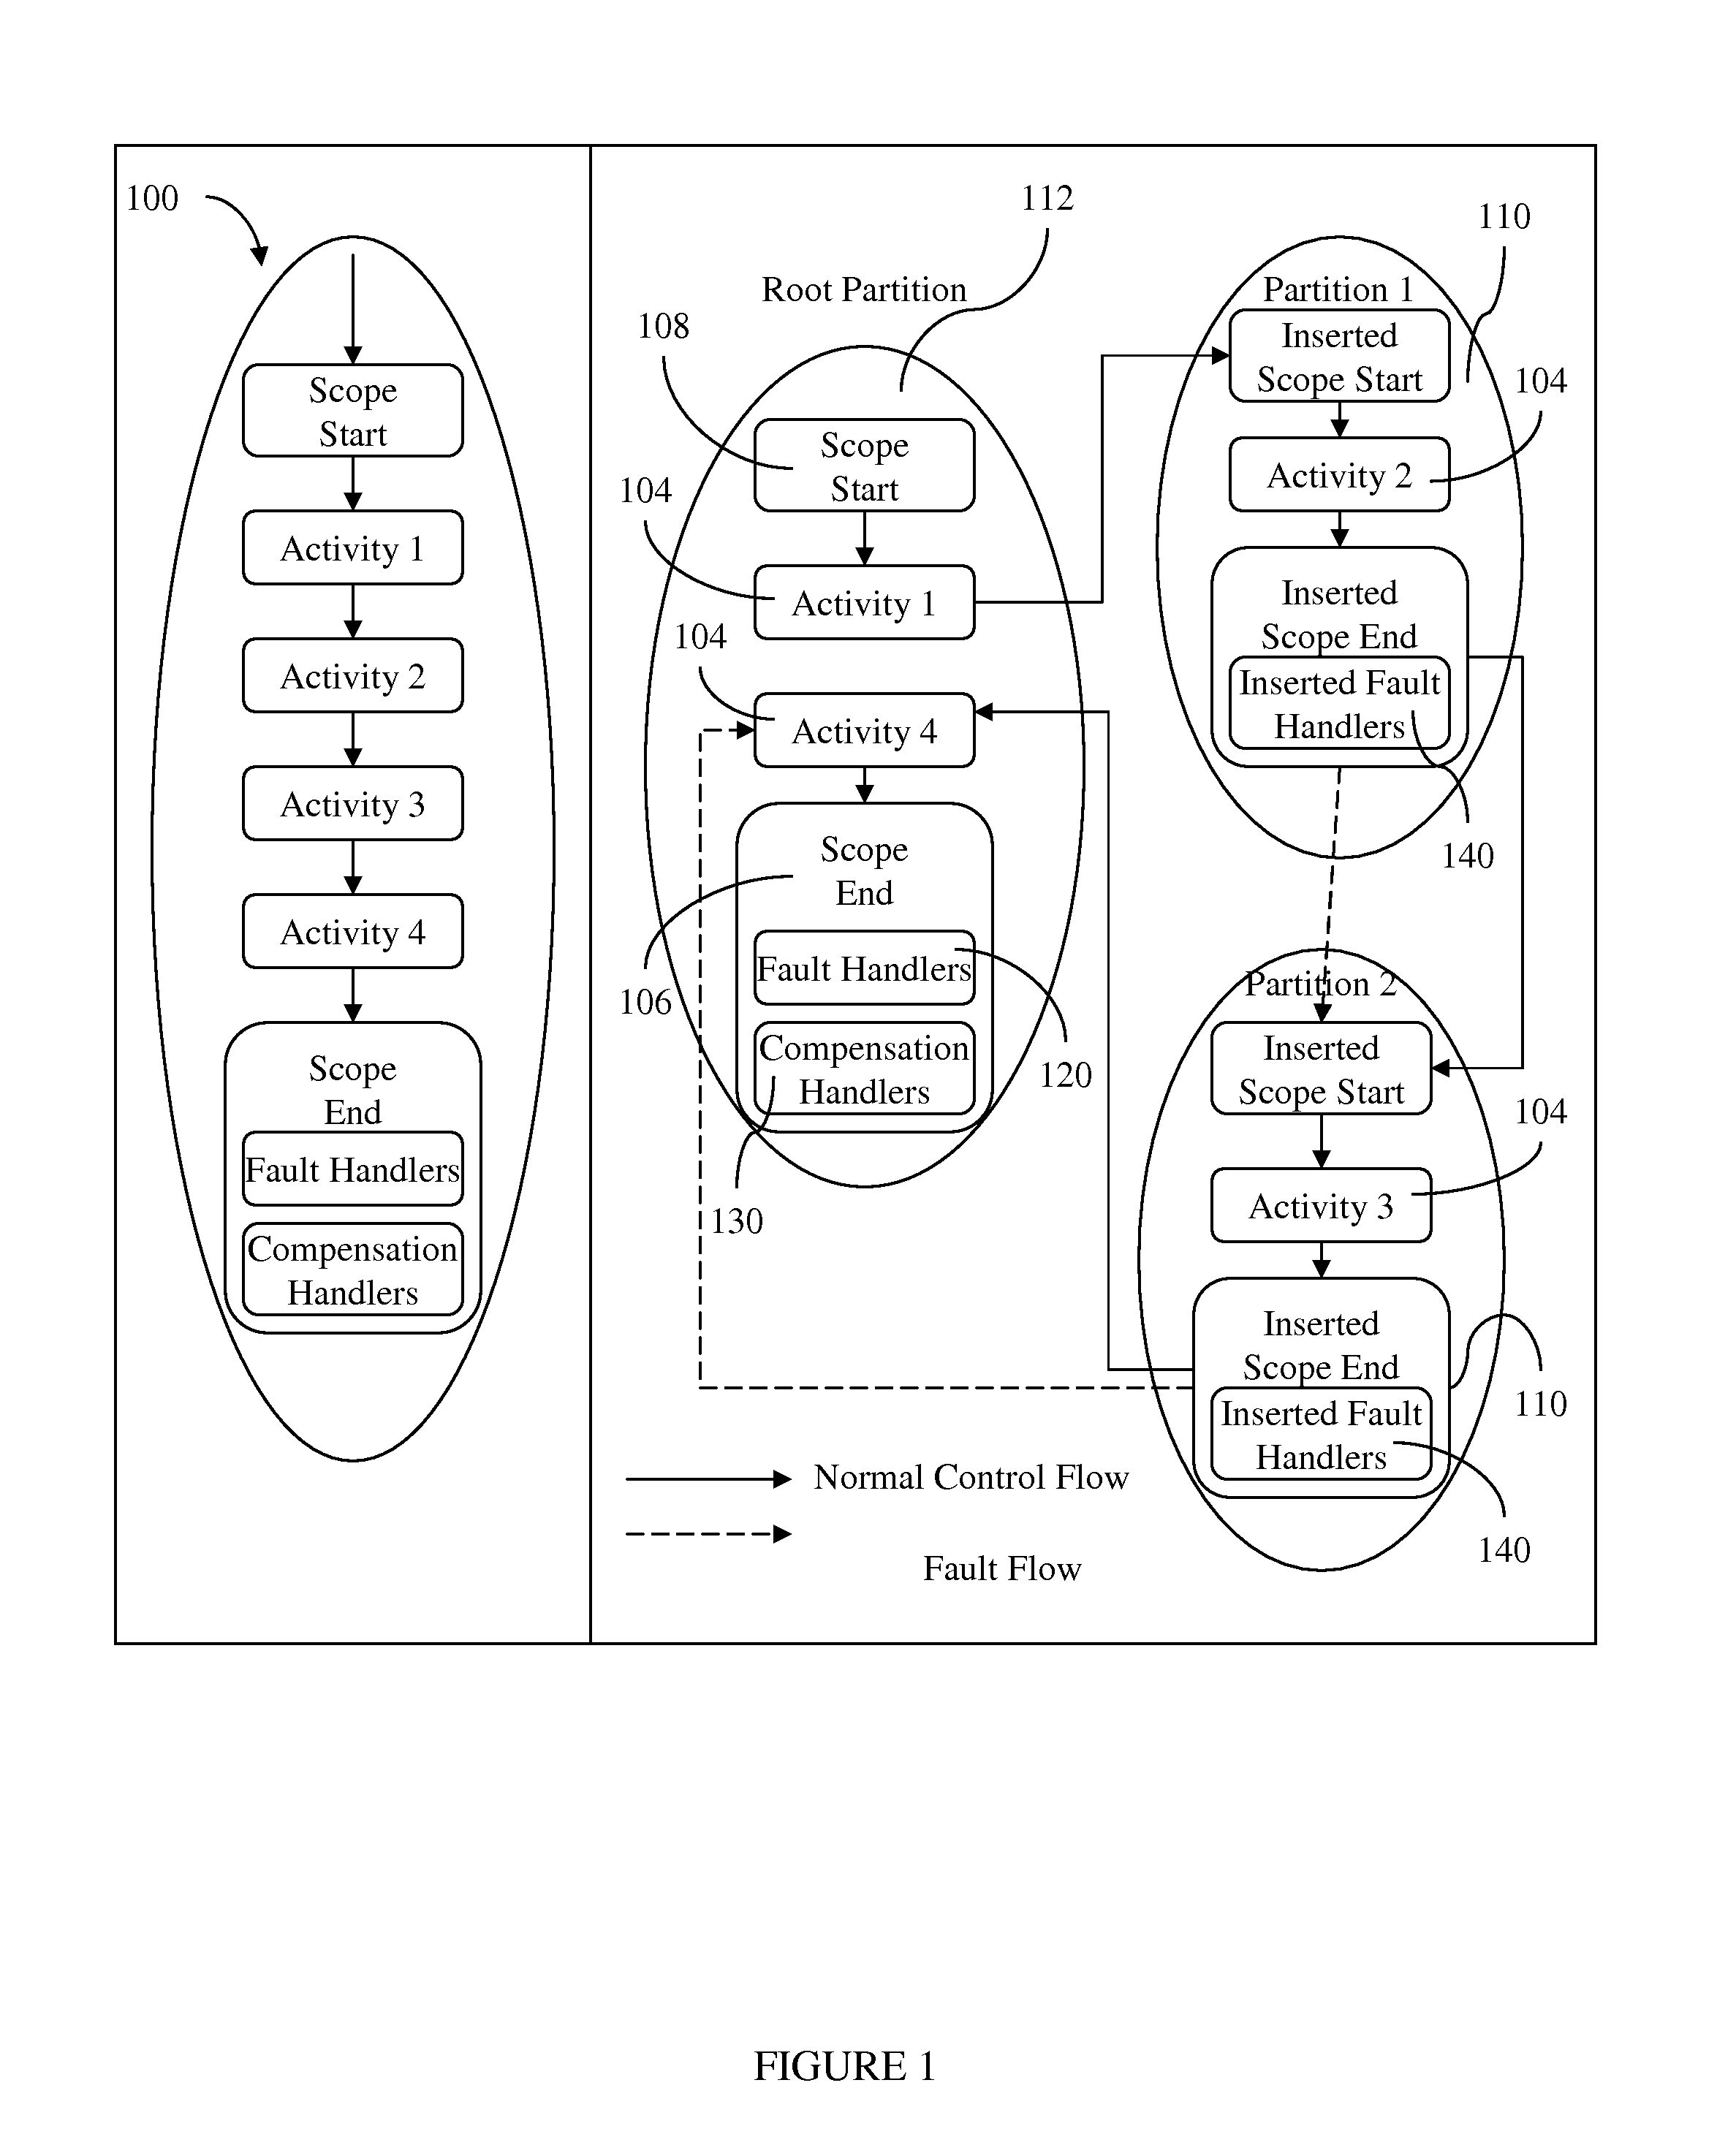 Method for Fault Handling in a Co-operative Workflow Environment